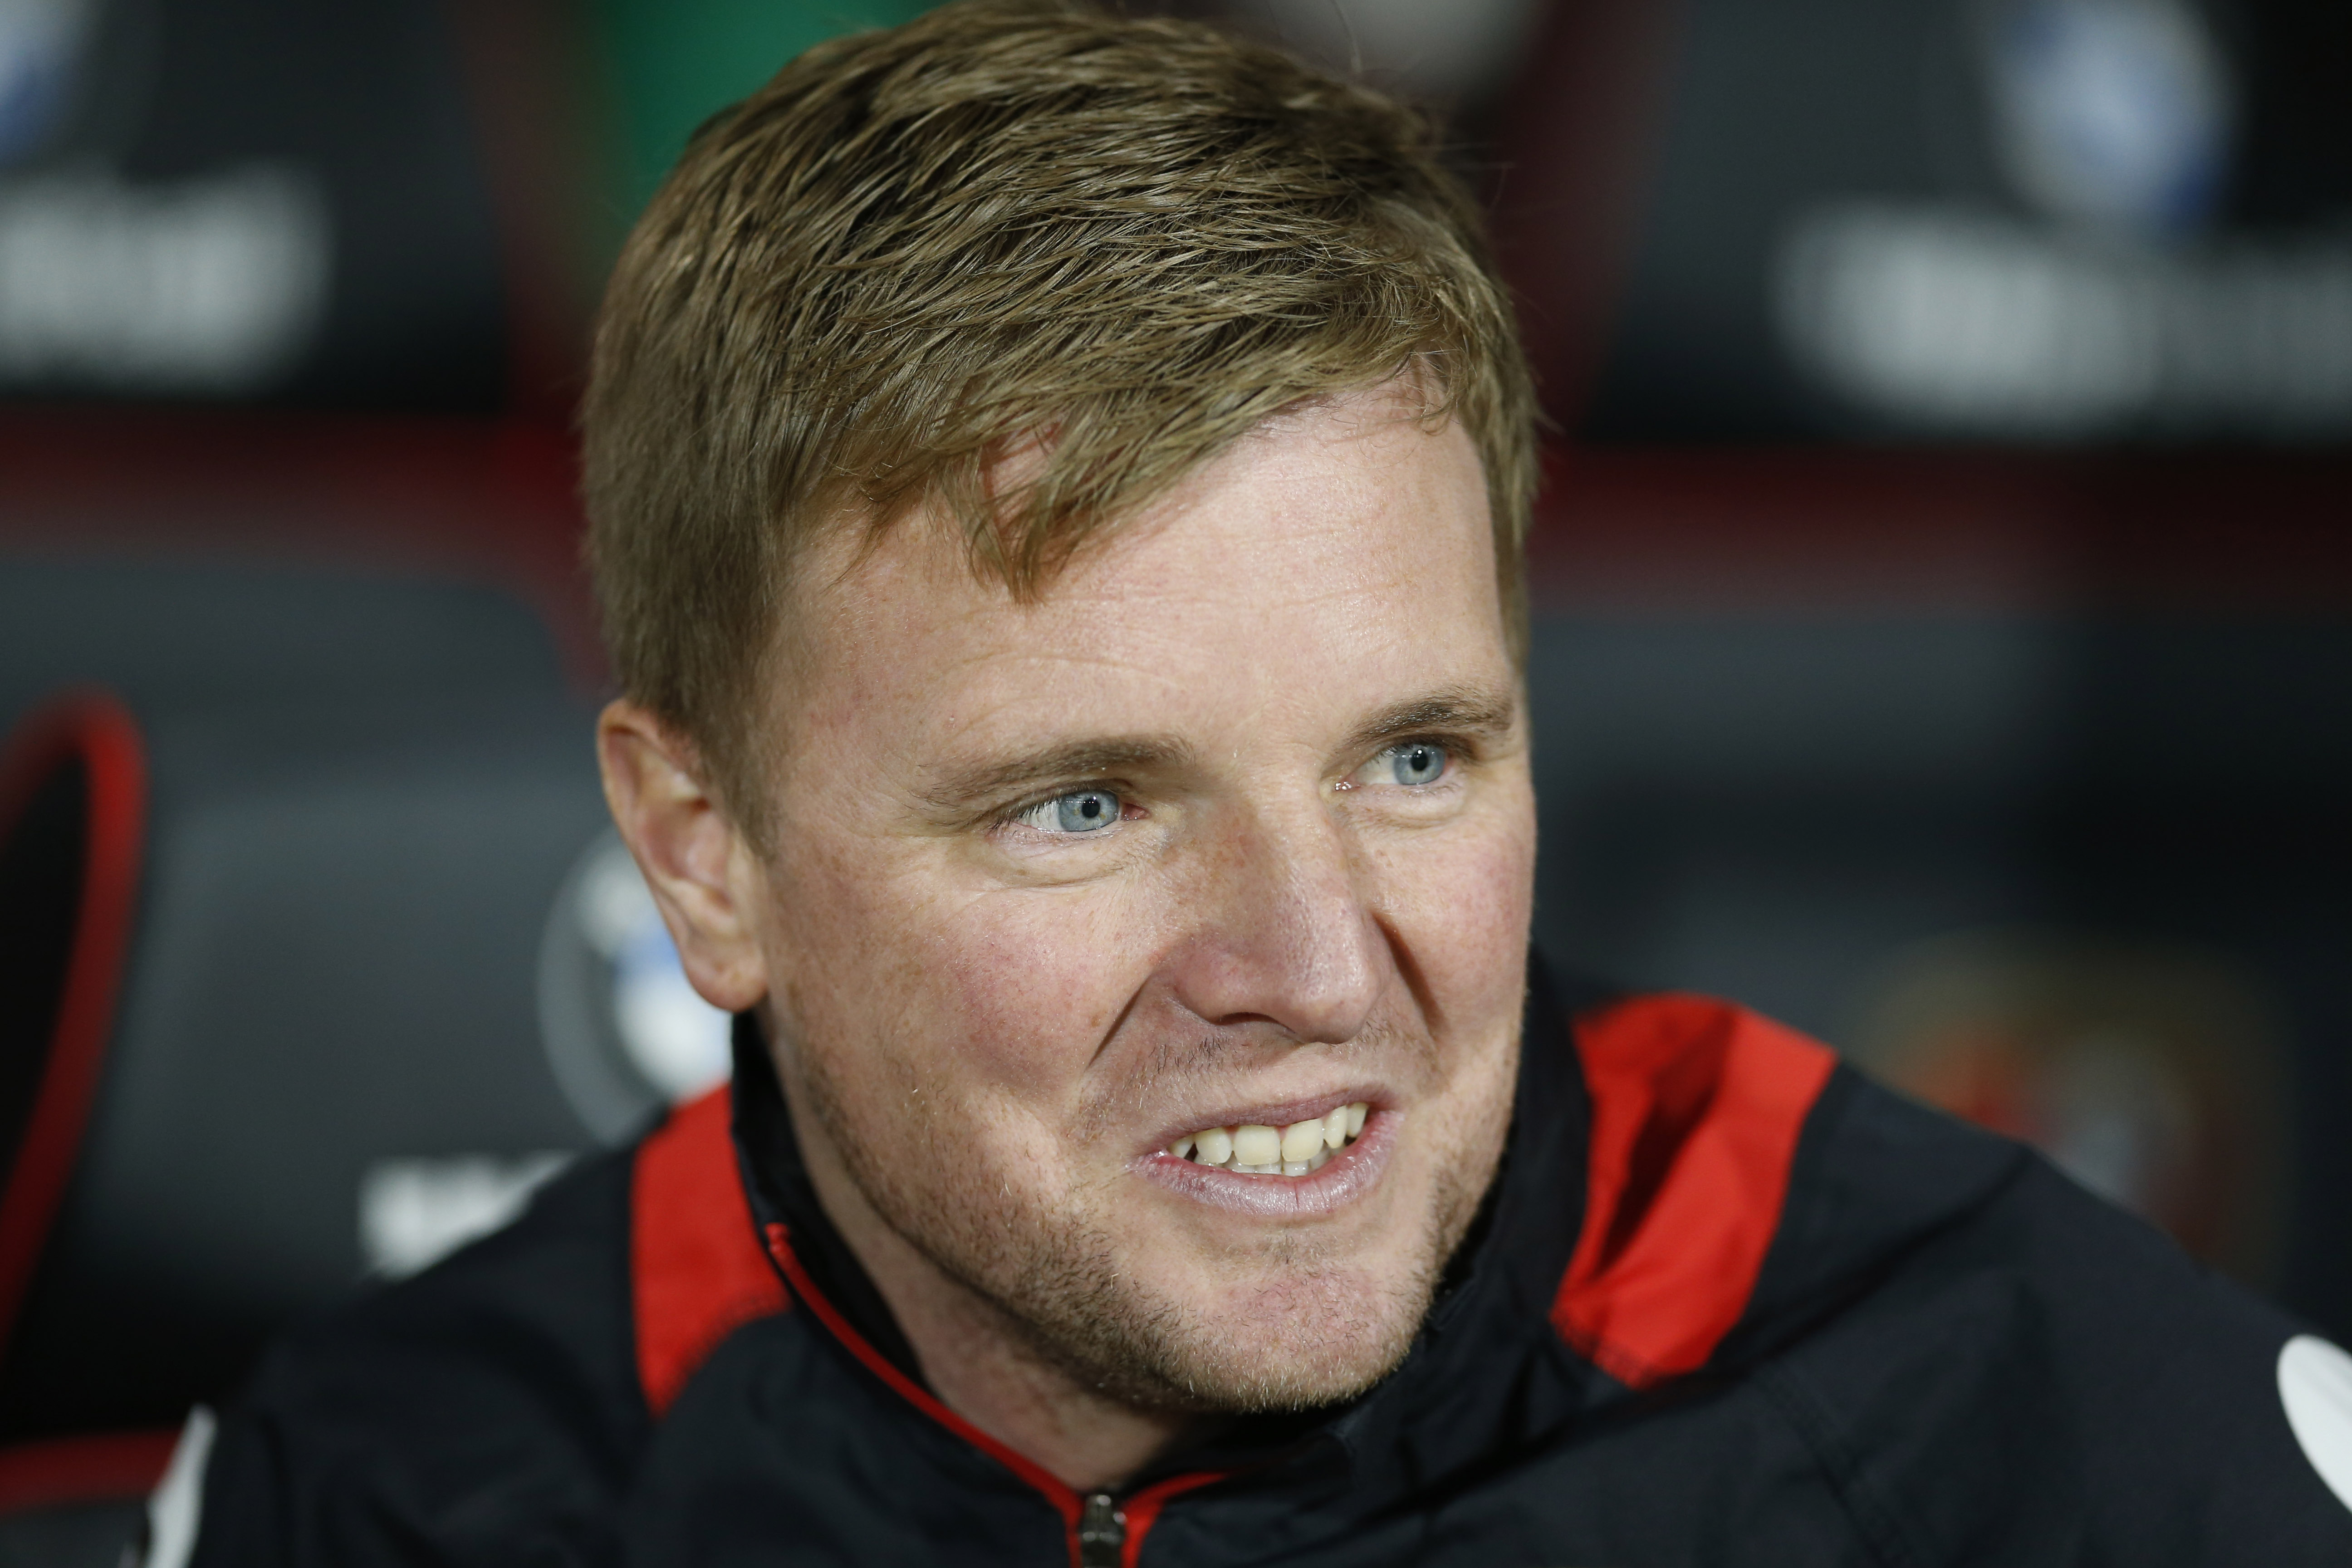 Football: Bournemouth fighting for Premier League lives, says Howe